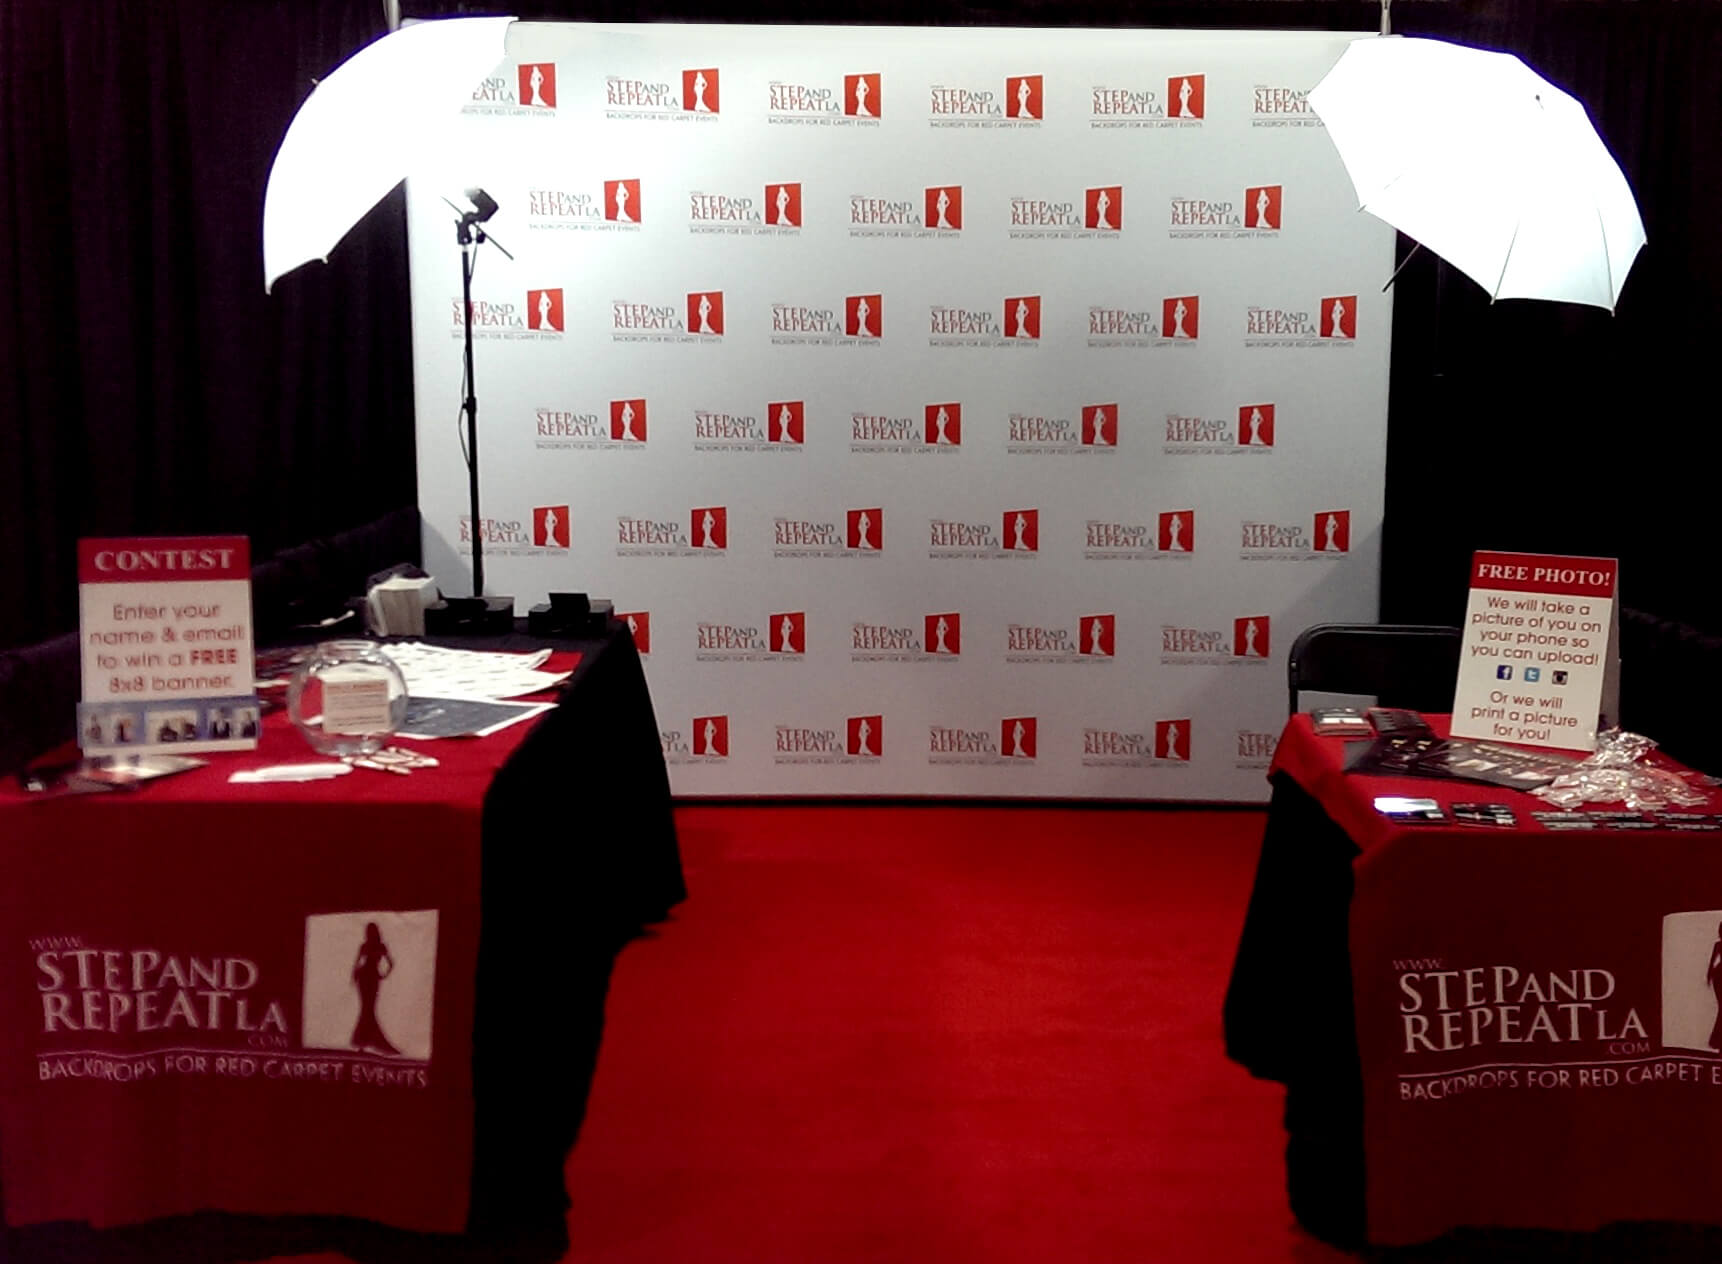 Step and Repeat LA Trade show booth in Boston